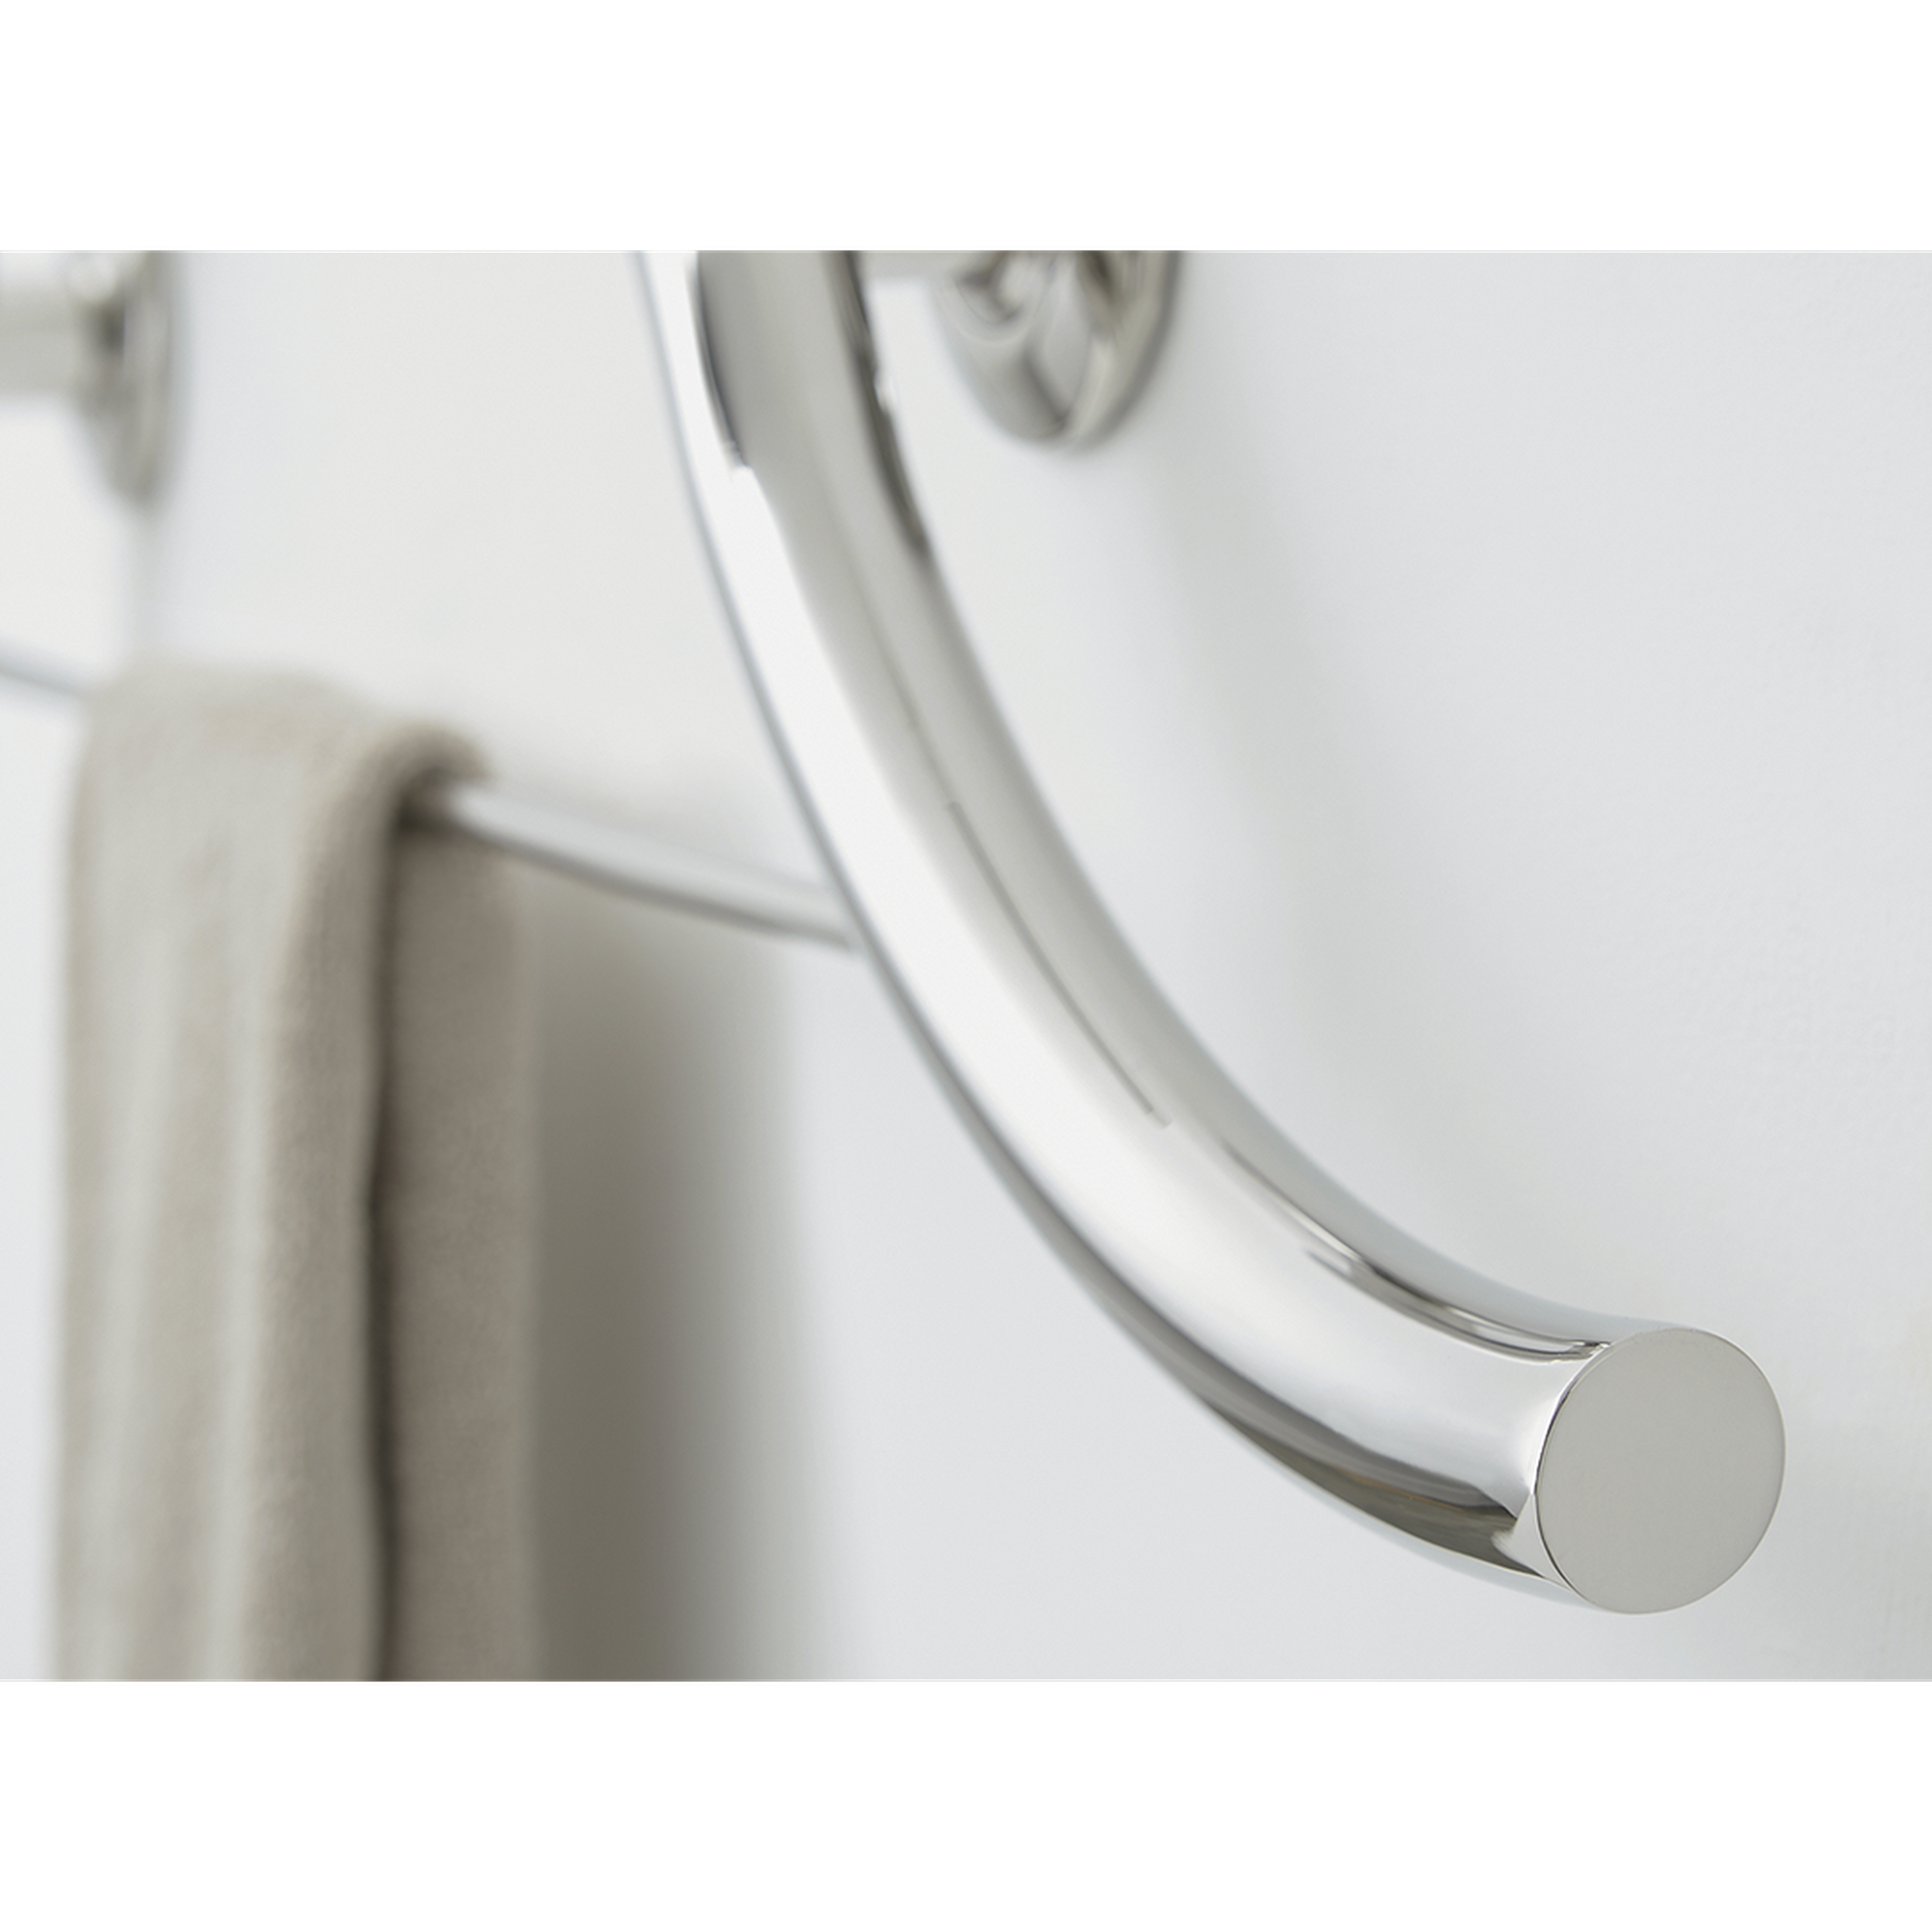 Seachrome Lifestyle & Wellness 30" Polished Stainless Steel 1.25 Diameter Concealed Flange Left-Handed Configuration Piano Curved Grab Bar With Towel Bar